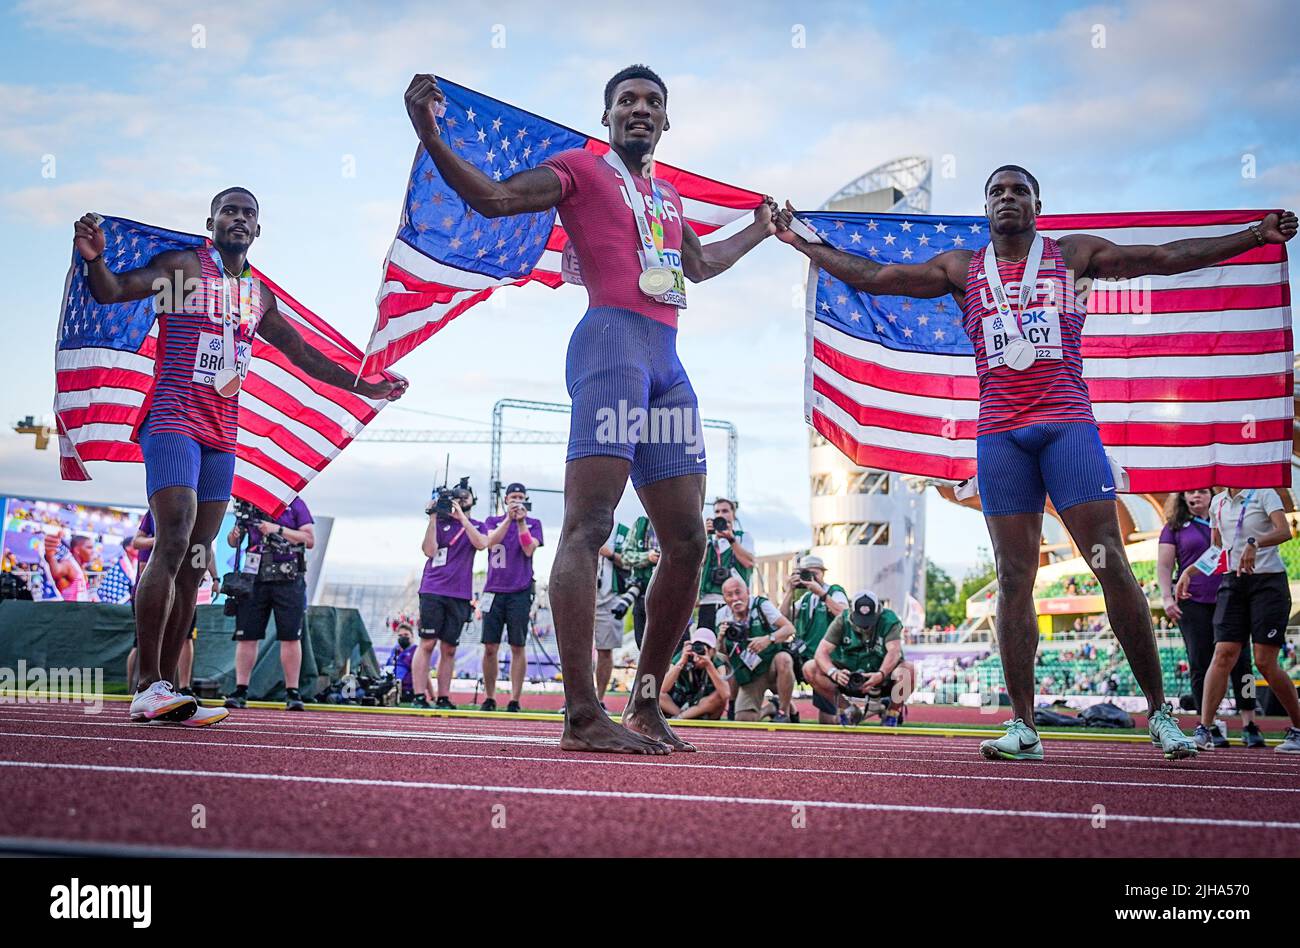 Eugene, USA. 16th July, 2022. Athletics: World Championships: Trayvon Bromell (l-r), Fred Kerley and Marvin Bracy (all USA) after the 100 m final. Fred Kerley won in 9.86 seconds. Bracy and Bromell were each stopped at 9.88 seconds, Bracy got silver, Bromell bronze. Credit: Michael Kappeler/dpa/Alamy Live News Stock Photo